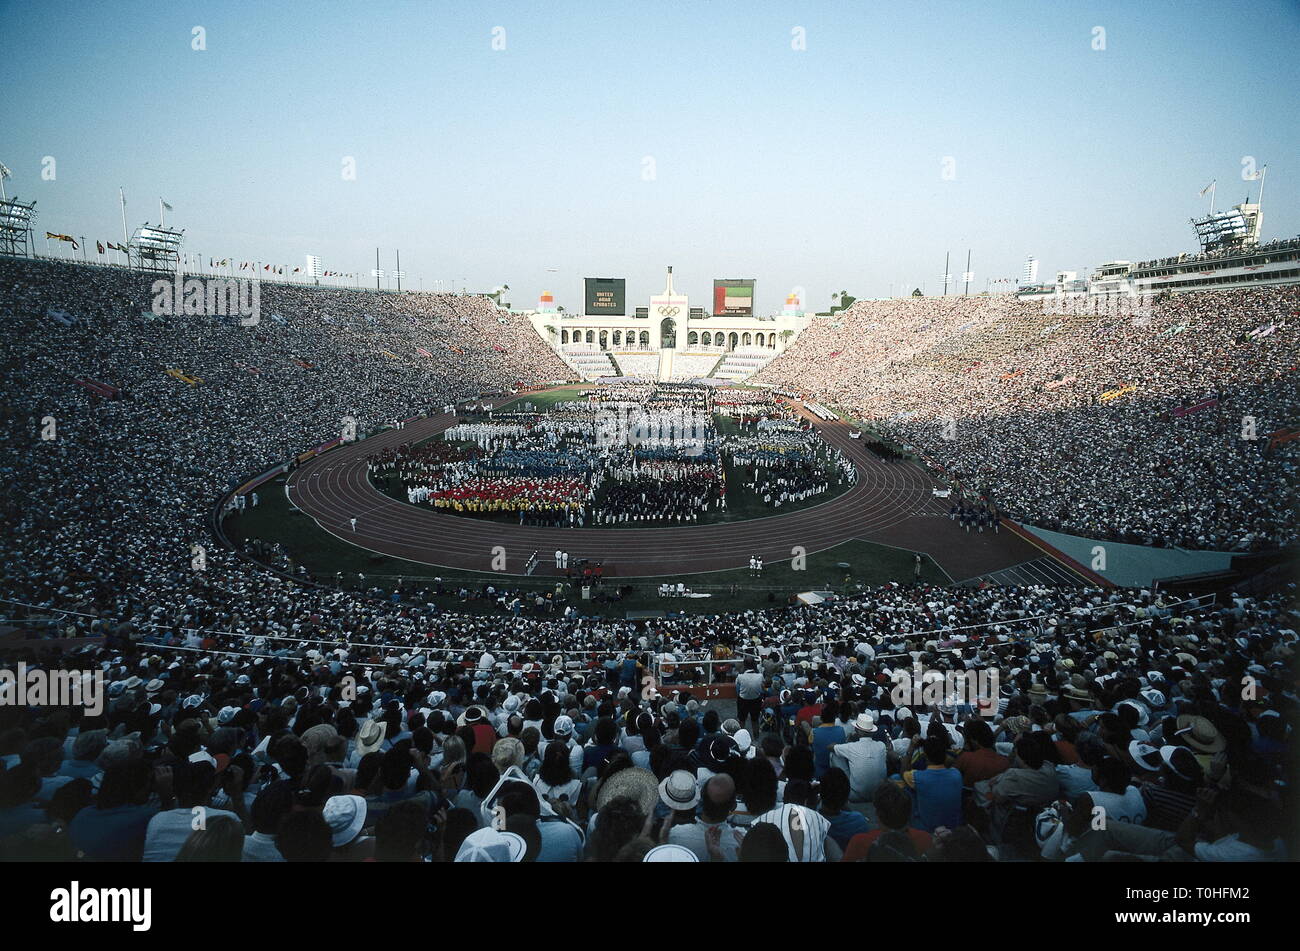 Sport, XXIII Giochi Olimpici, cerimonia di apertura, Los Angeles, 1984, Additional-Rights-Clearance-Info-Not-Available Foto Stock